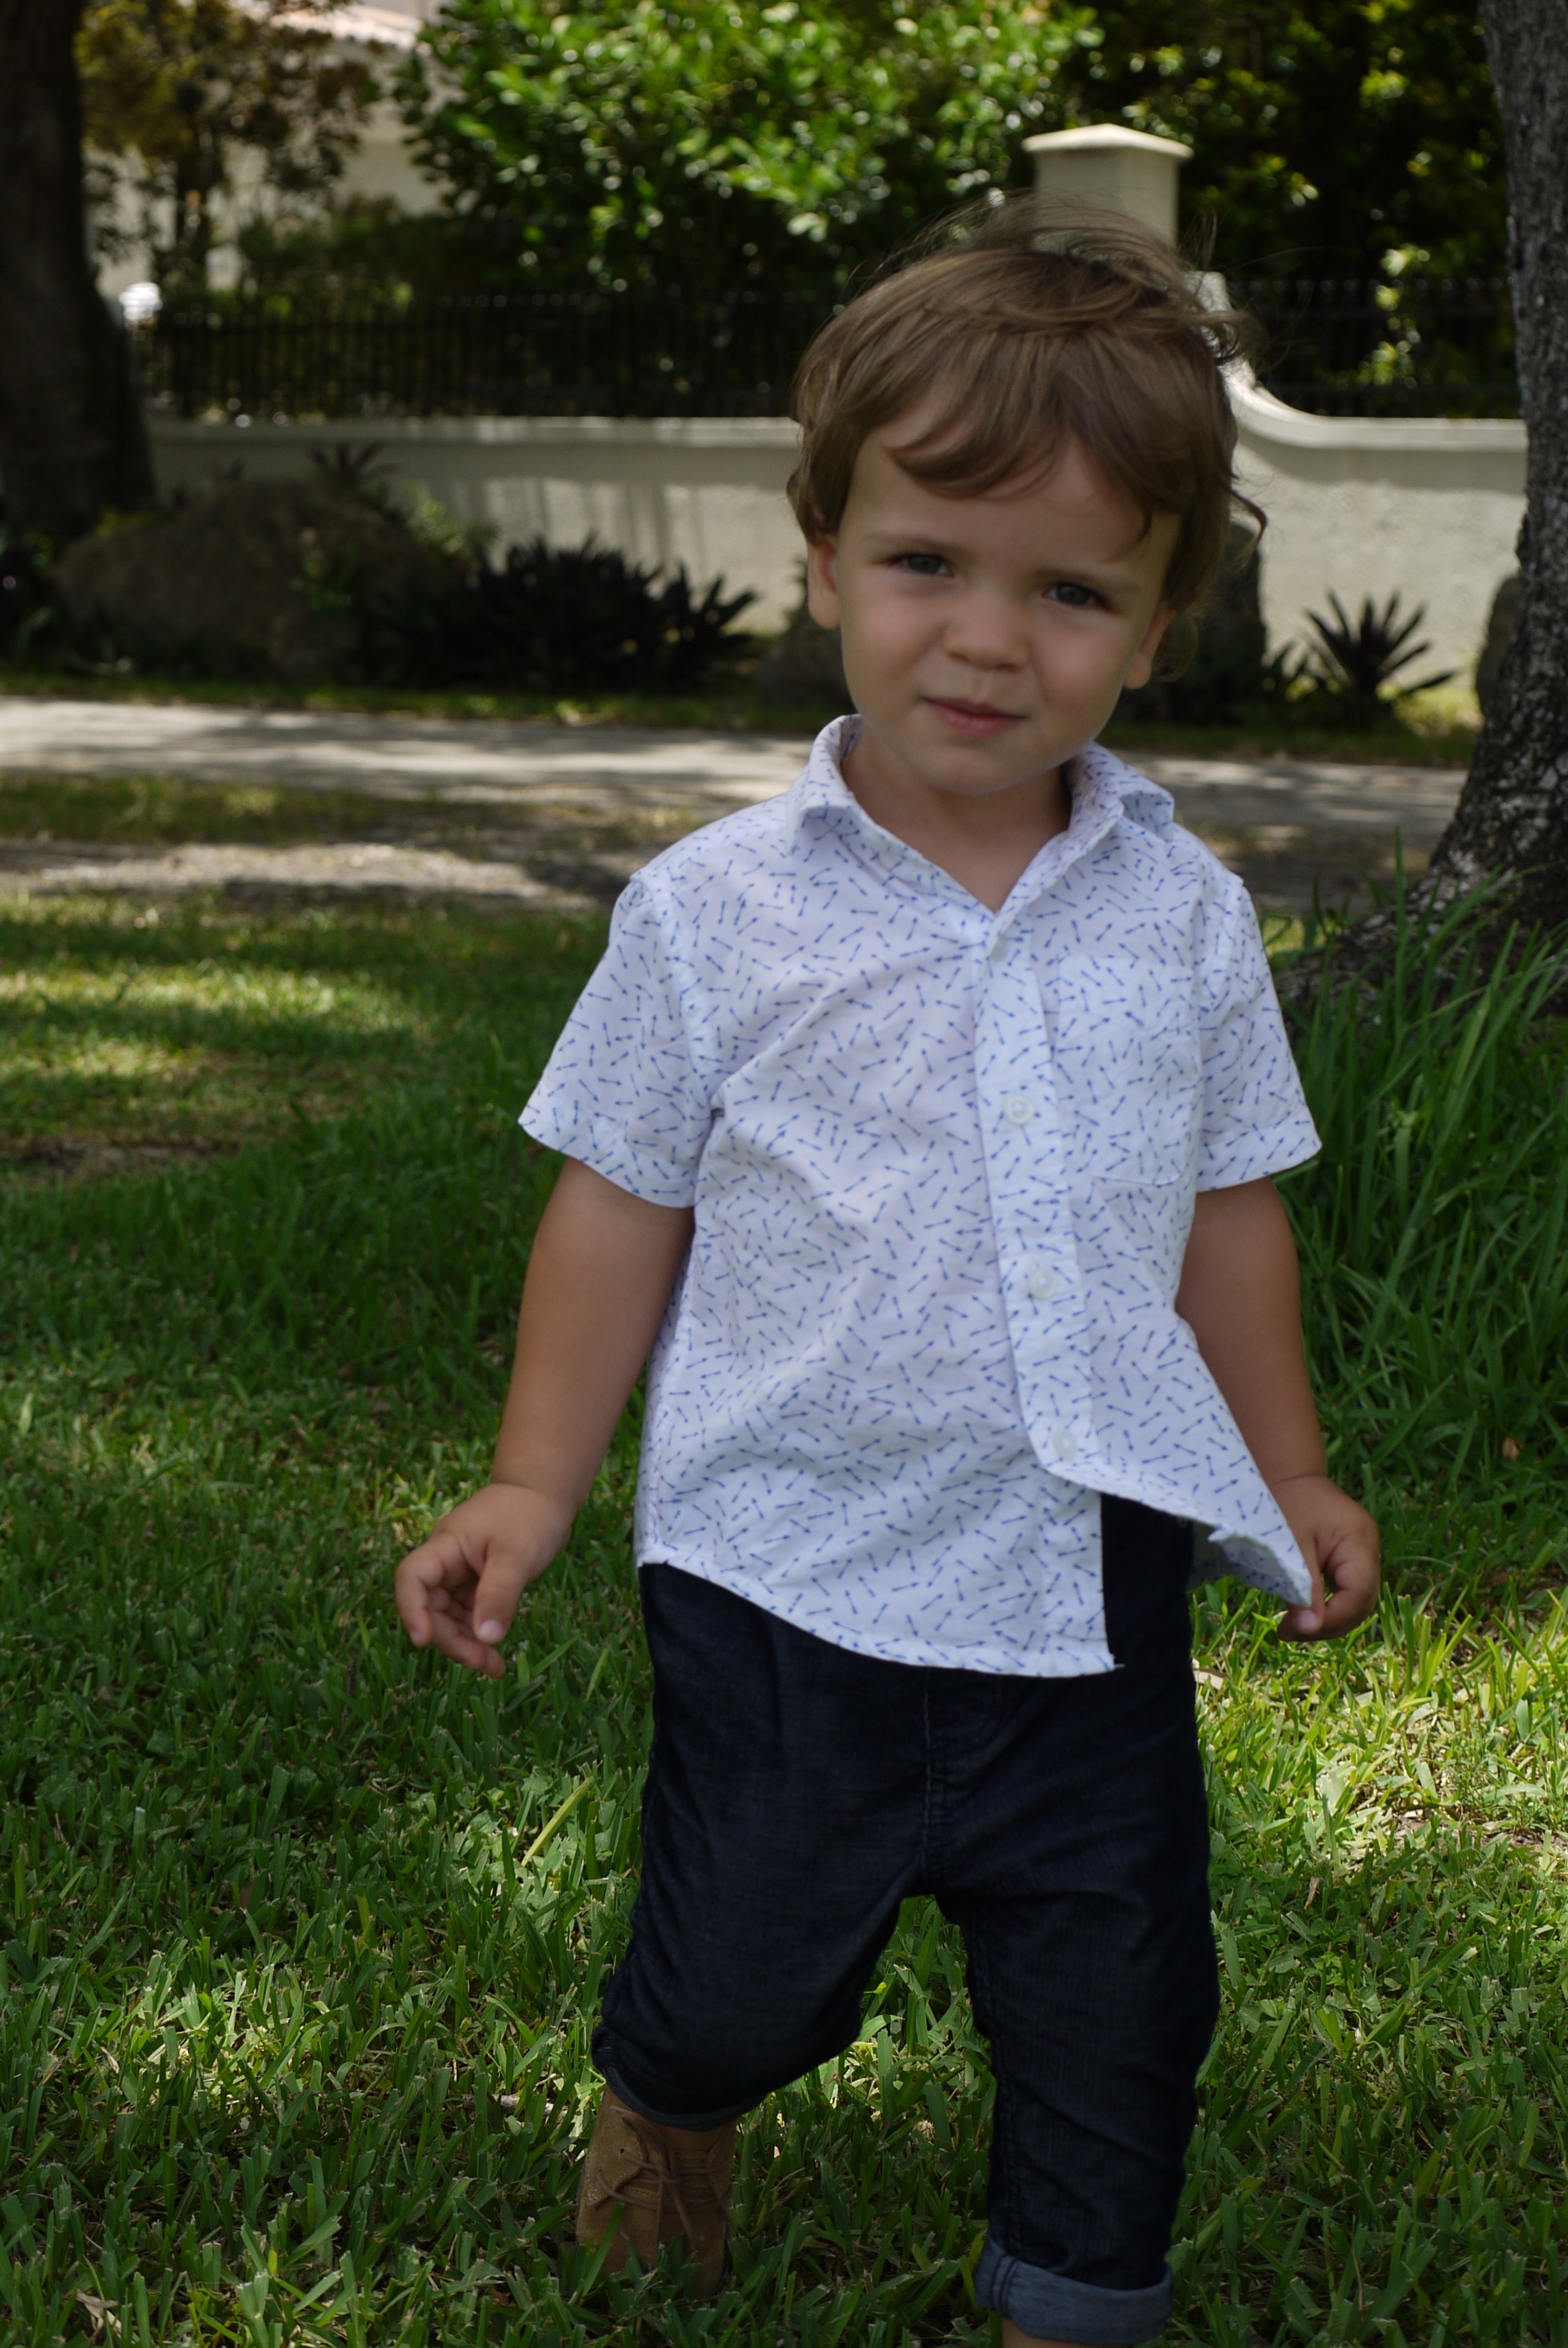 Alba Marina Otero fashion blogger from Mylovelypeople blog shares with you some pics of her little prince